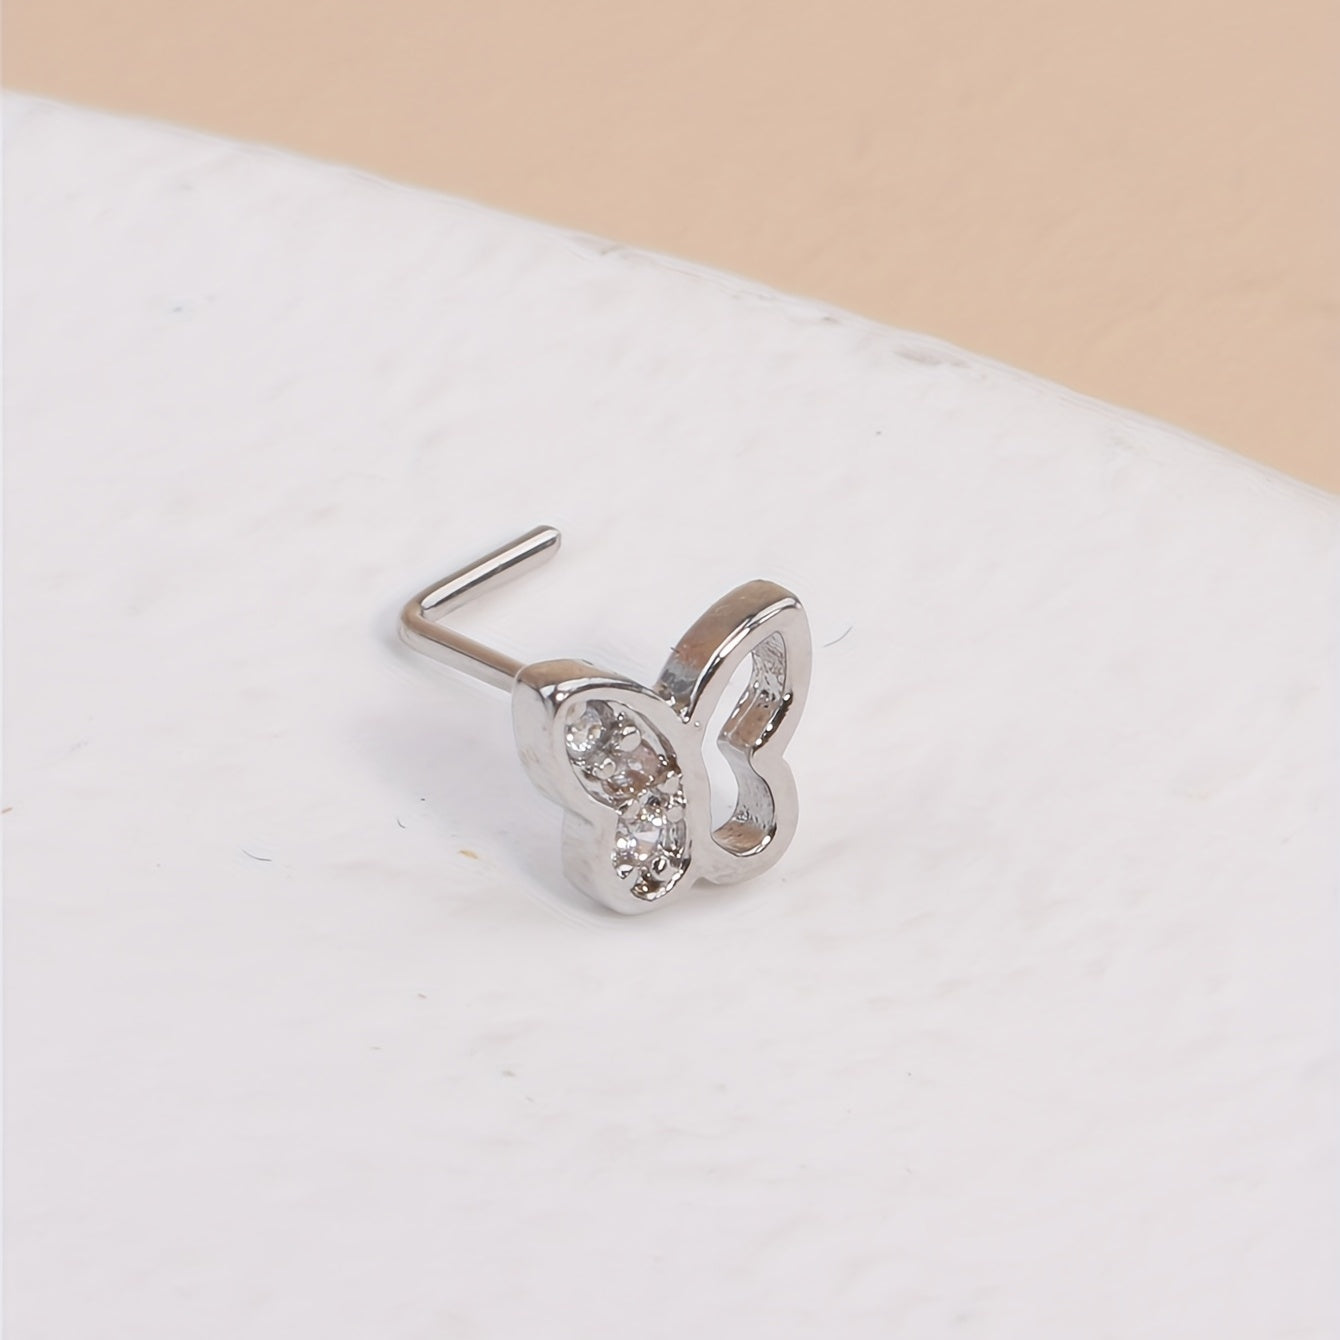 1Pc Hollow Butterfly Shape Nose Rings Inlaid Shiny Zircon L Shape Nose Stud Ring For Women Body Piercing Jewelry